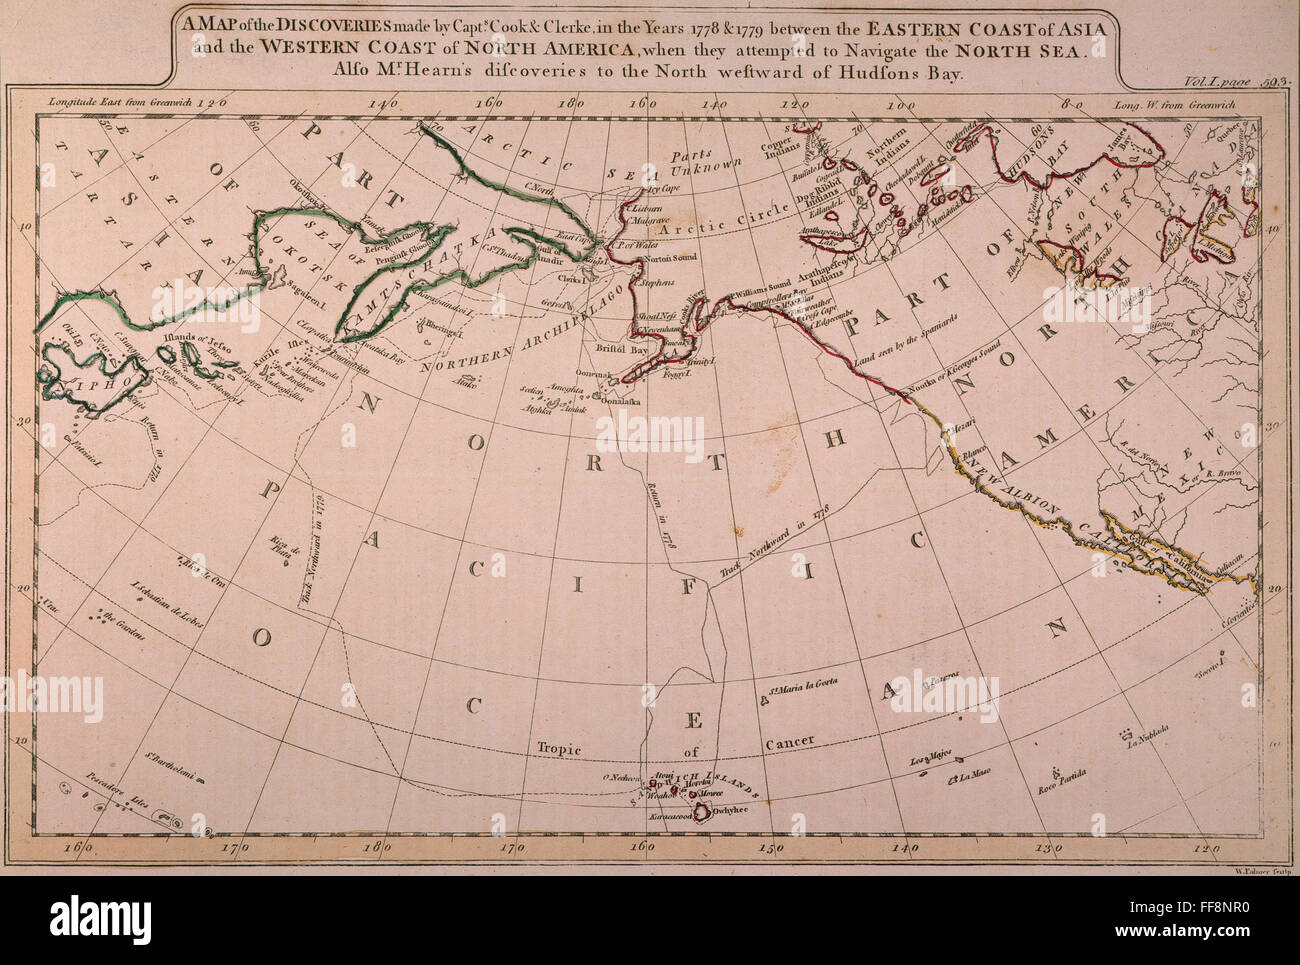 COOK: PACIFIC COAST MAP. /nEnglish map, late 18th century, of Captain James Cook's last voyage of exploration along the Pacific coast of North America in 1778-1779, also showing the recent discoveries of Samuel Hearne near Hudson Bay. Stock Photo